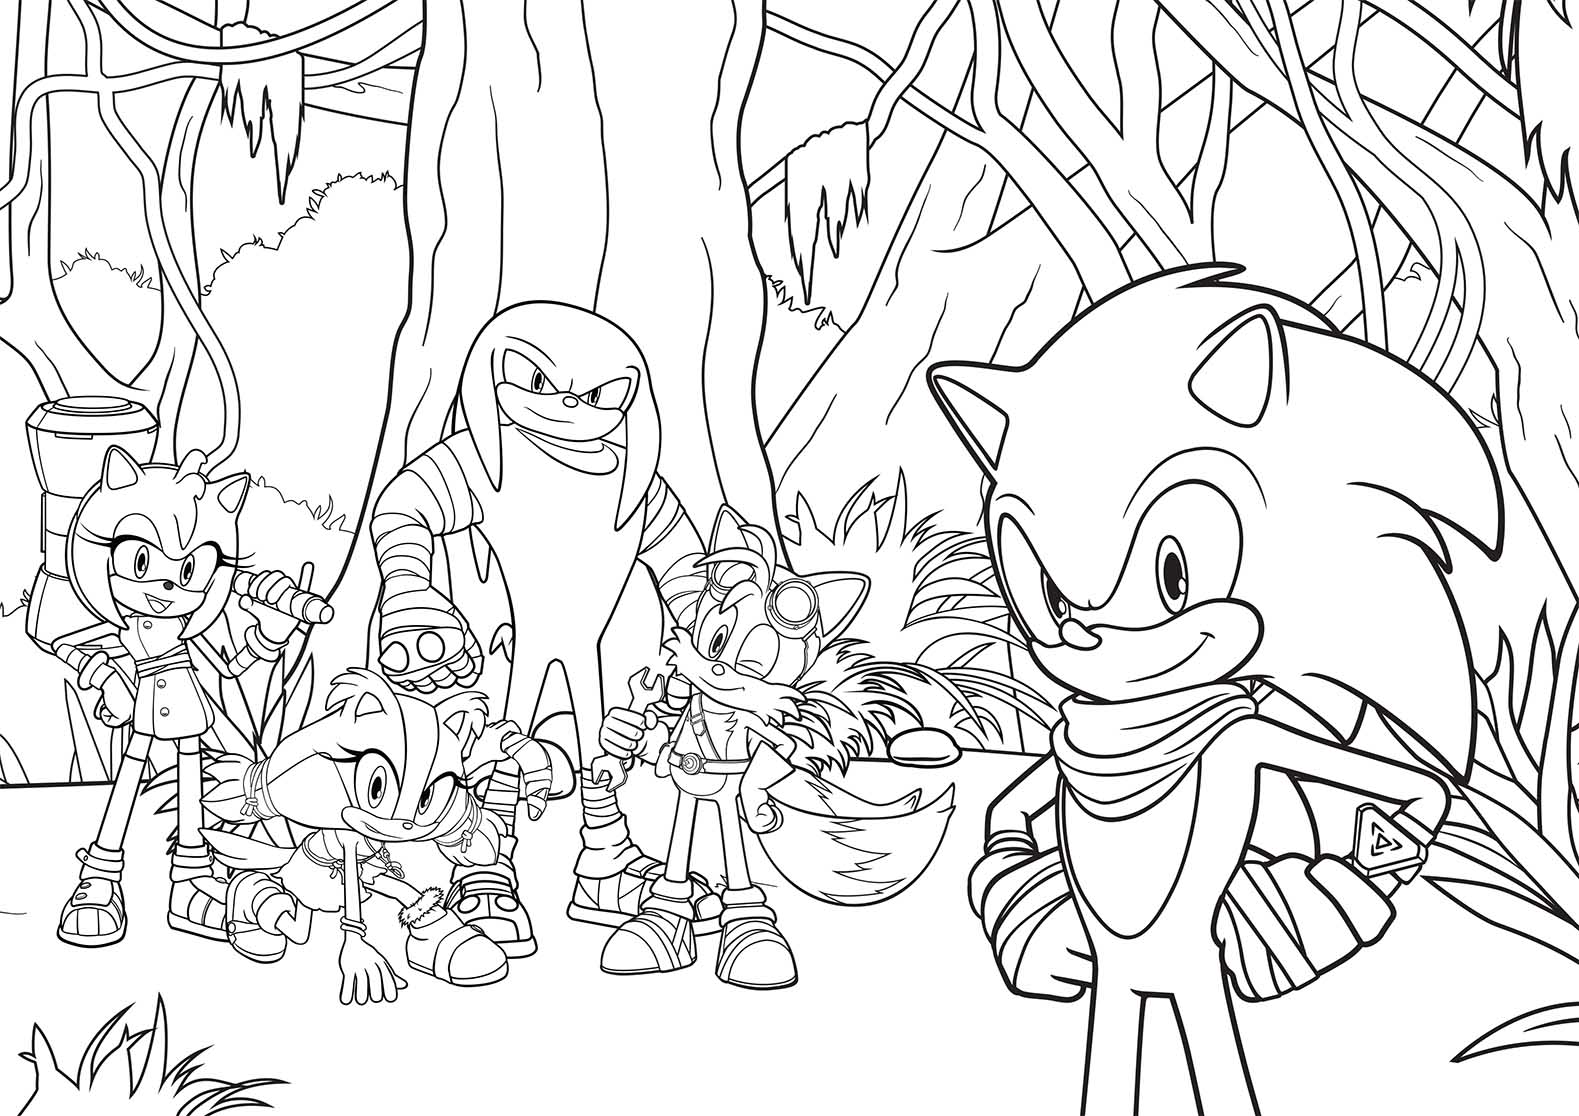 Sonic Boom_Colouring Sheet3 – Having fun with children